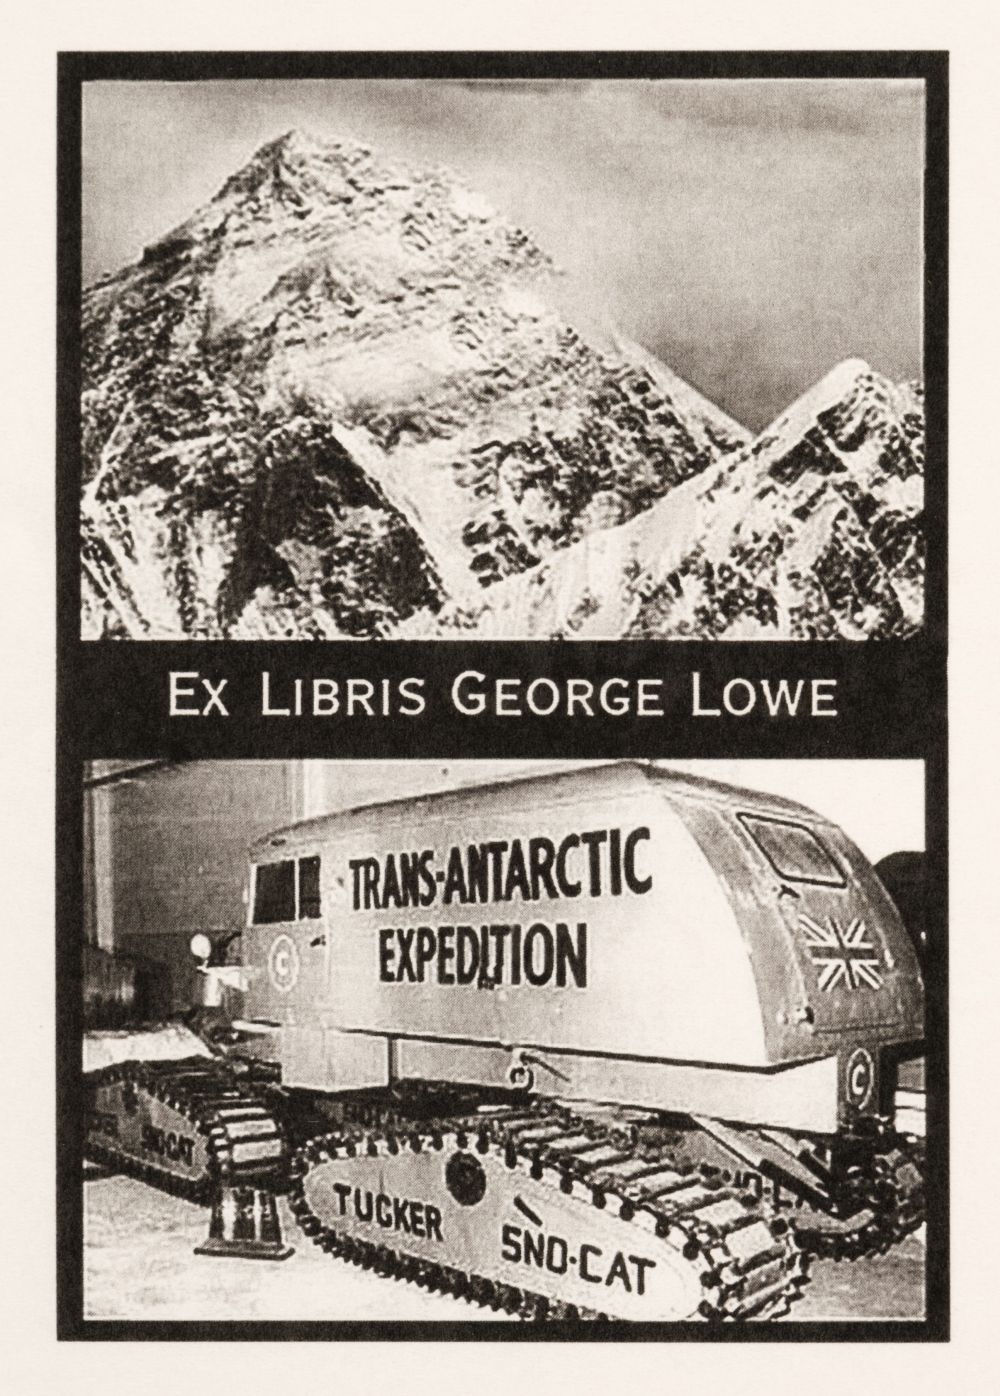 Lowe (George, 1924-2013). Collection of 40 mountaineering books ex libris George Lowe